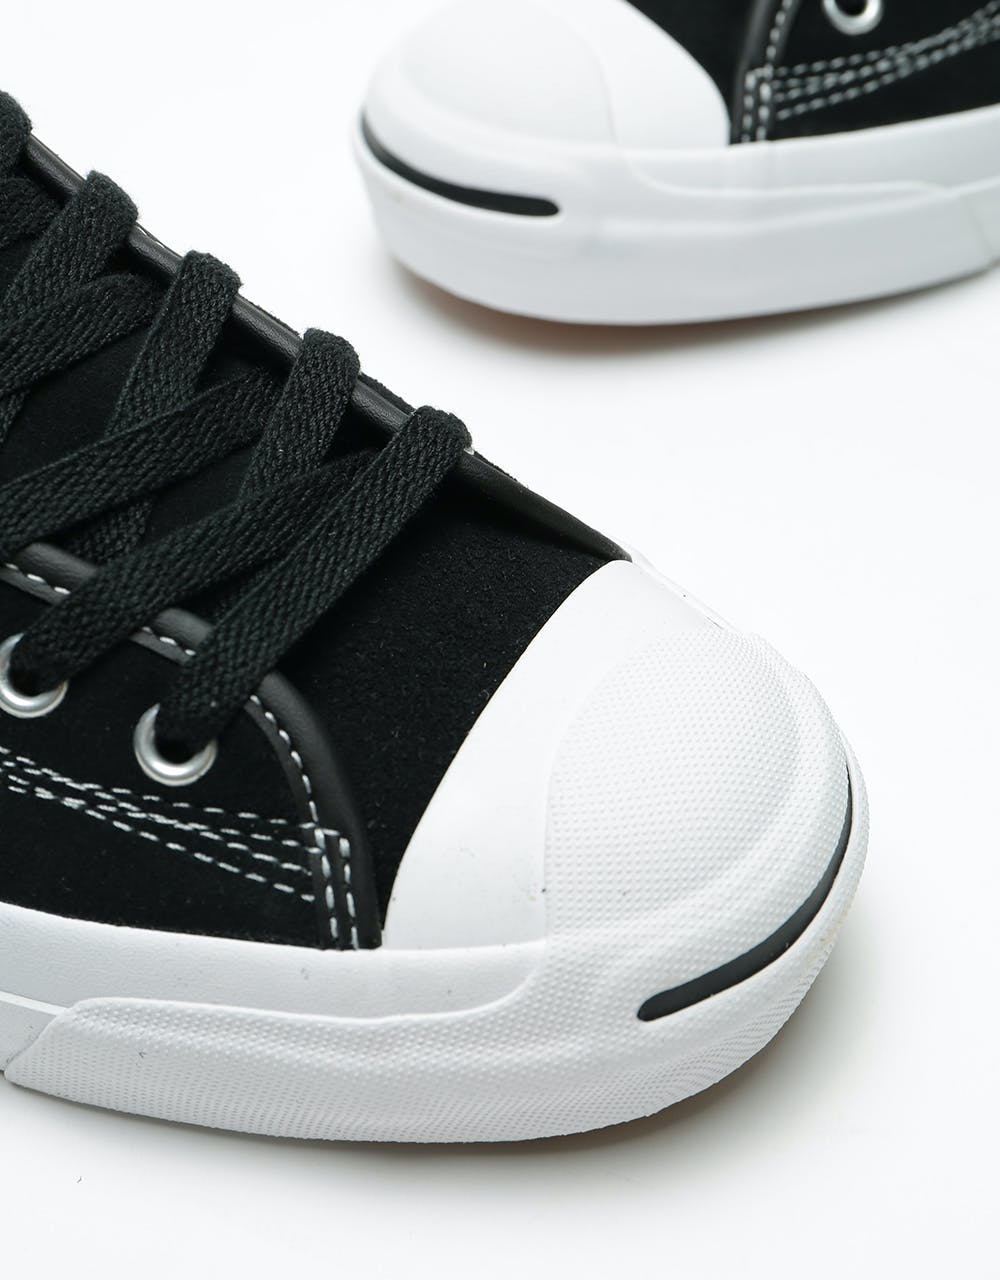 Converse Jack Purcell Pro Mid Suede Skate Shoes - Black/White/Black